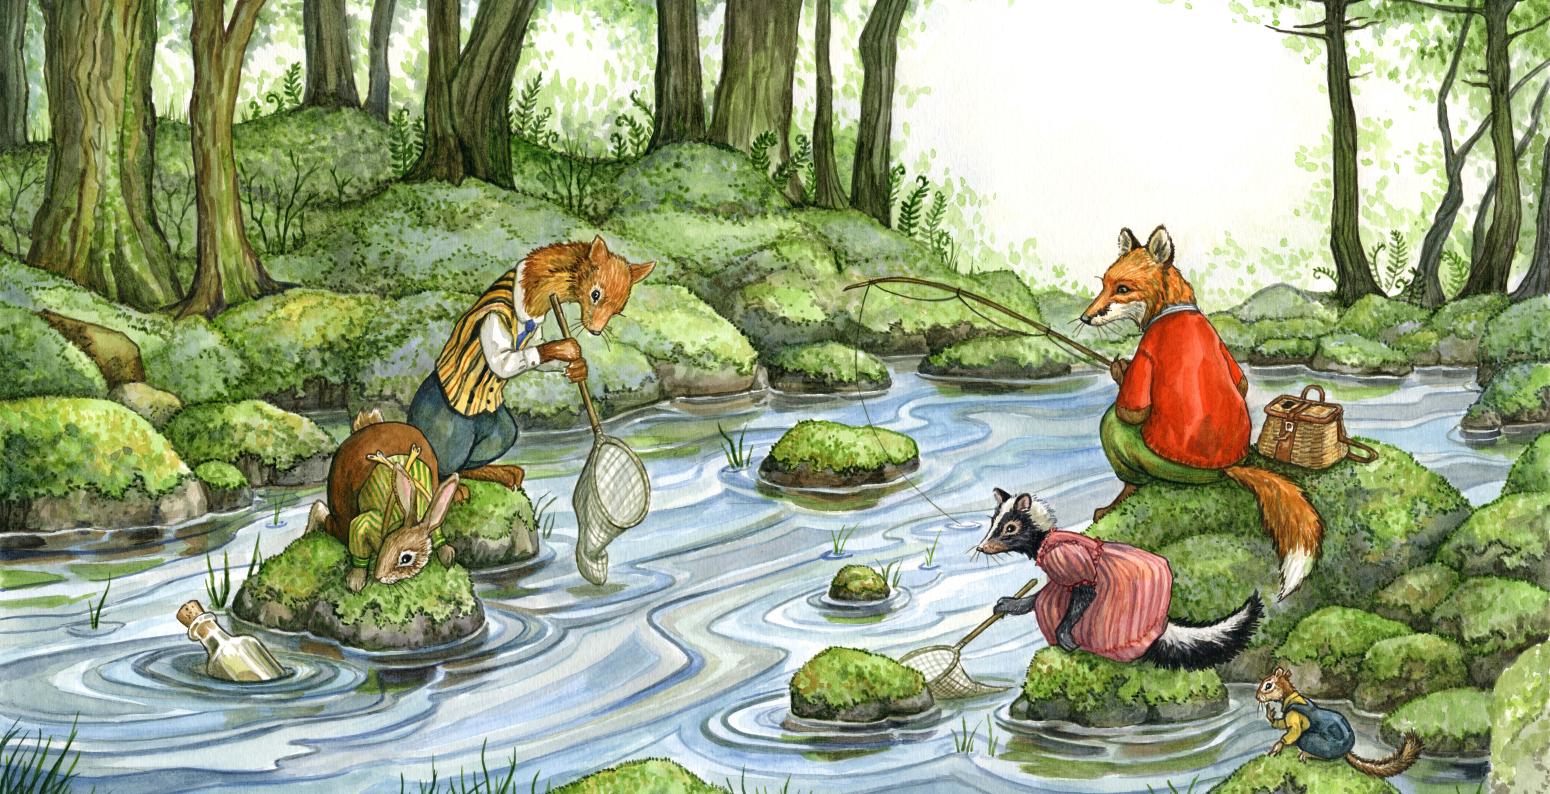 Hector Fox and friends at a stream, with fishing pole and nets.